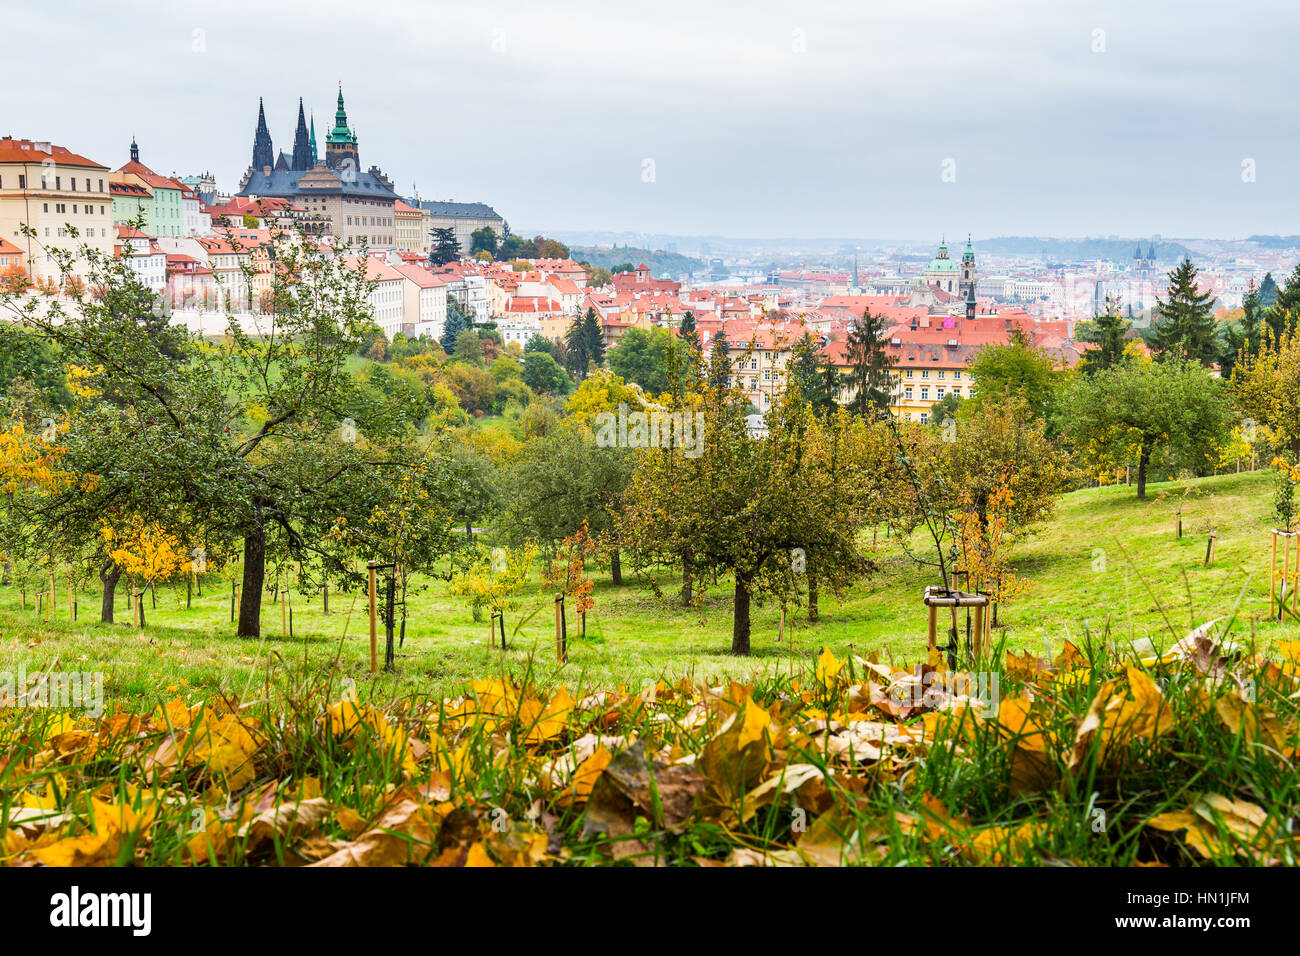 Prague Castle and Saint Vitus Cathedral, Czech Republic. Panoramic view Stock Photo